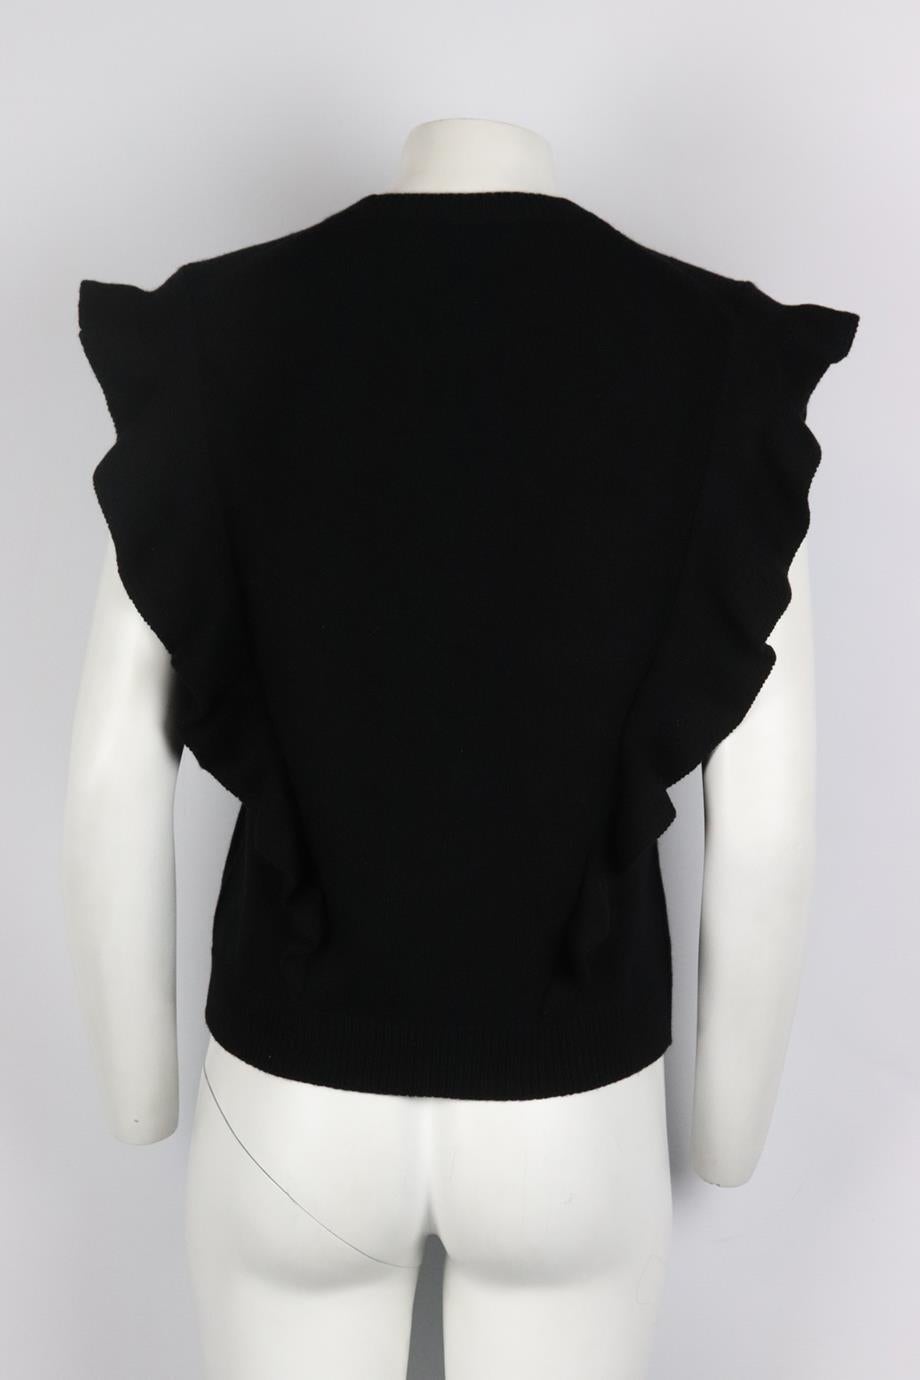 Chloé Ruffled Cashmere Top Large In Excellent Condition In London, GB